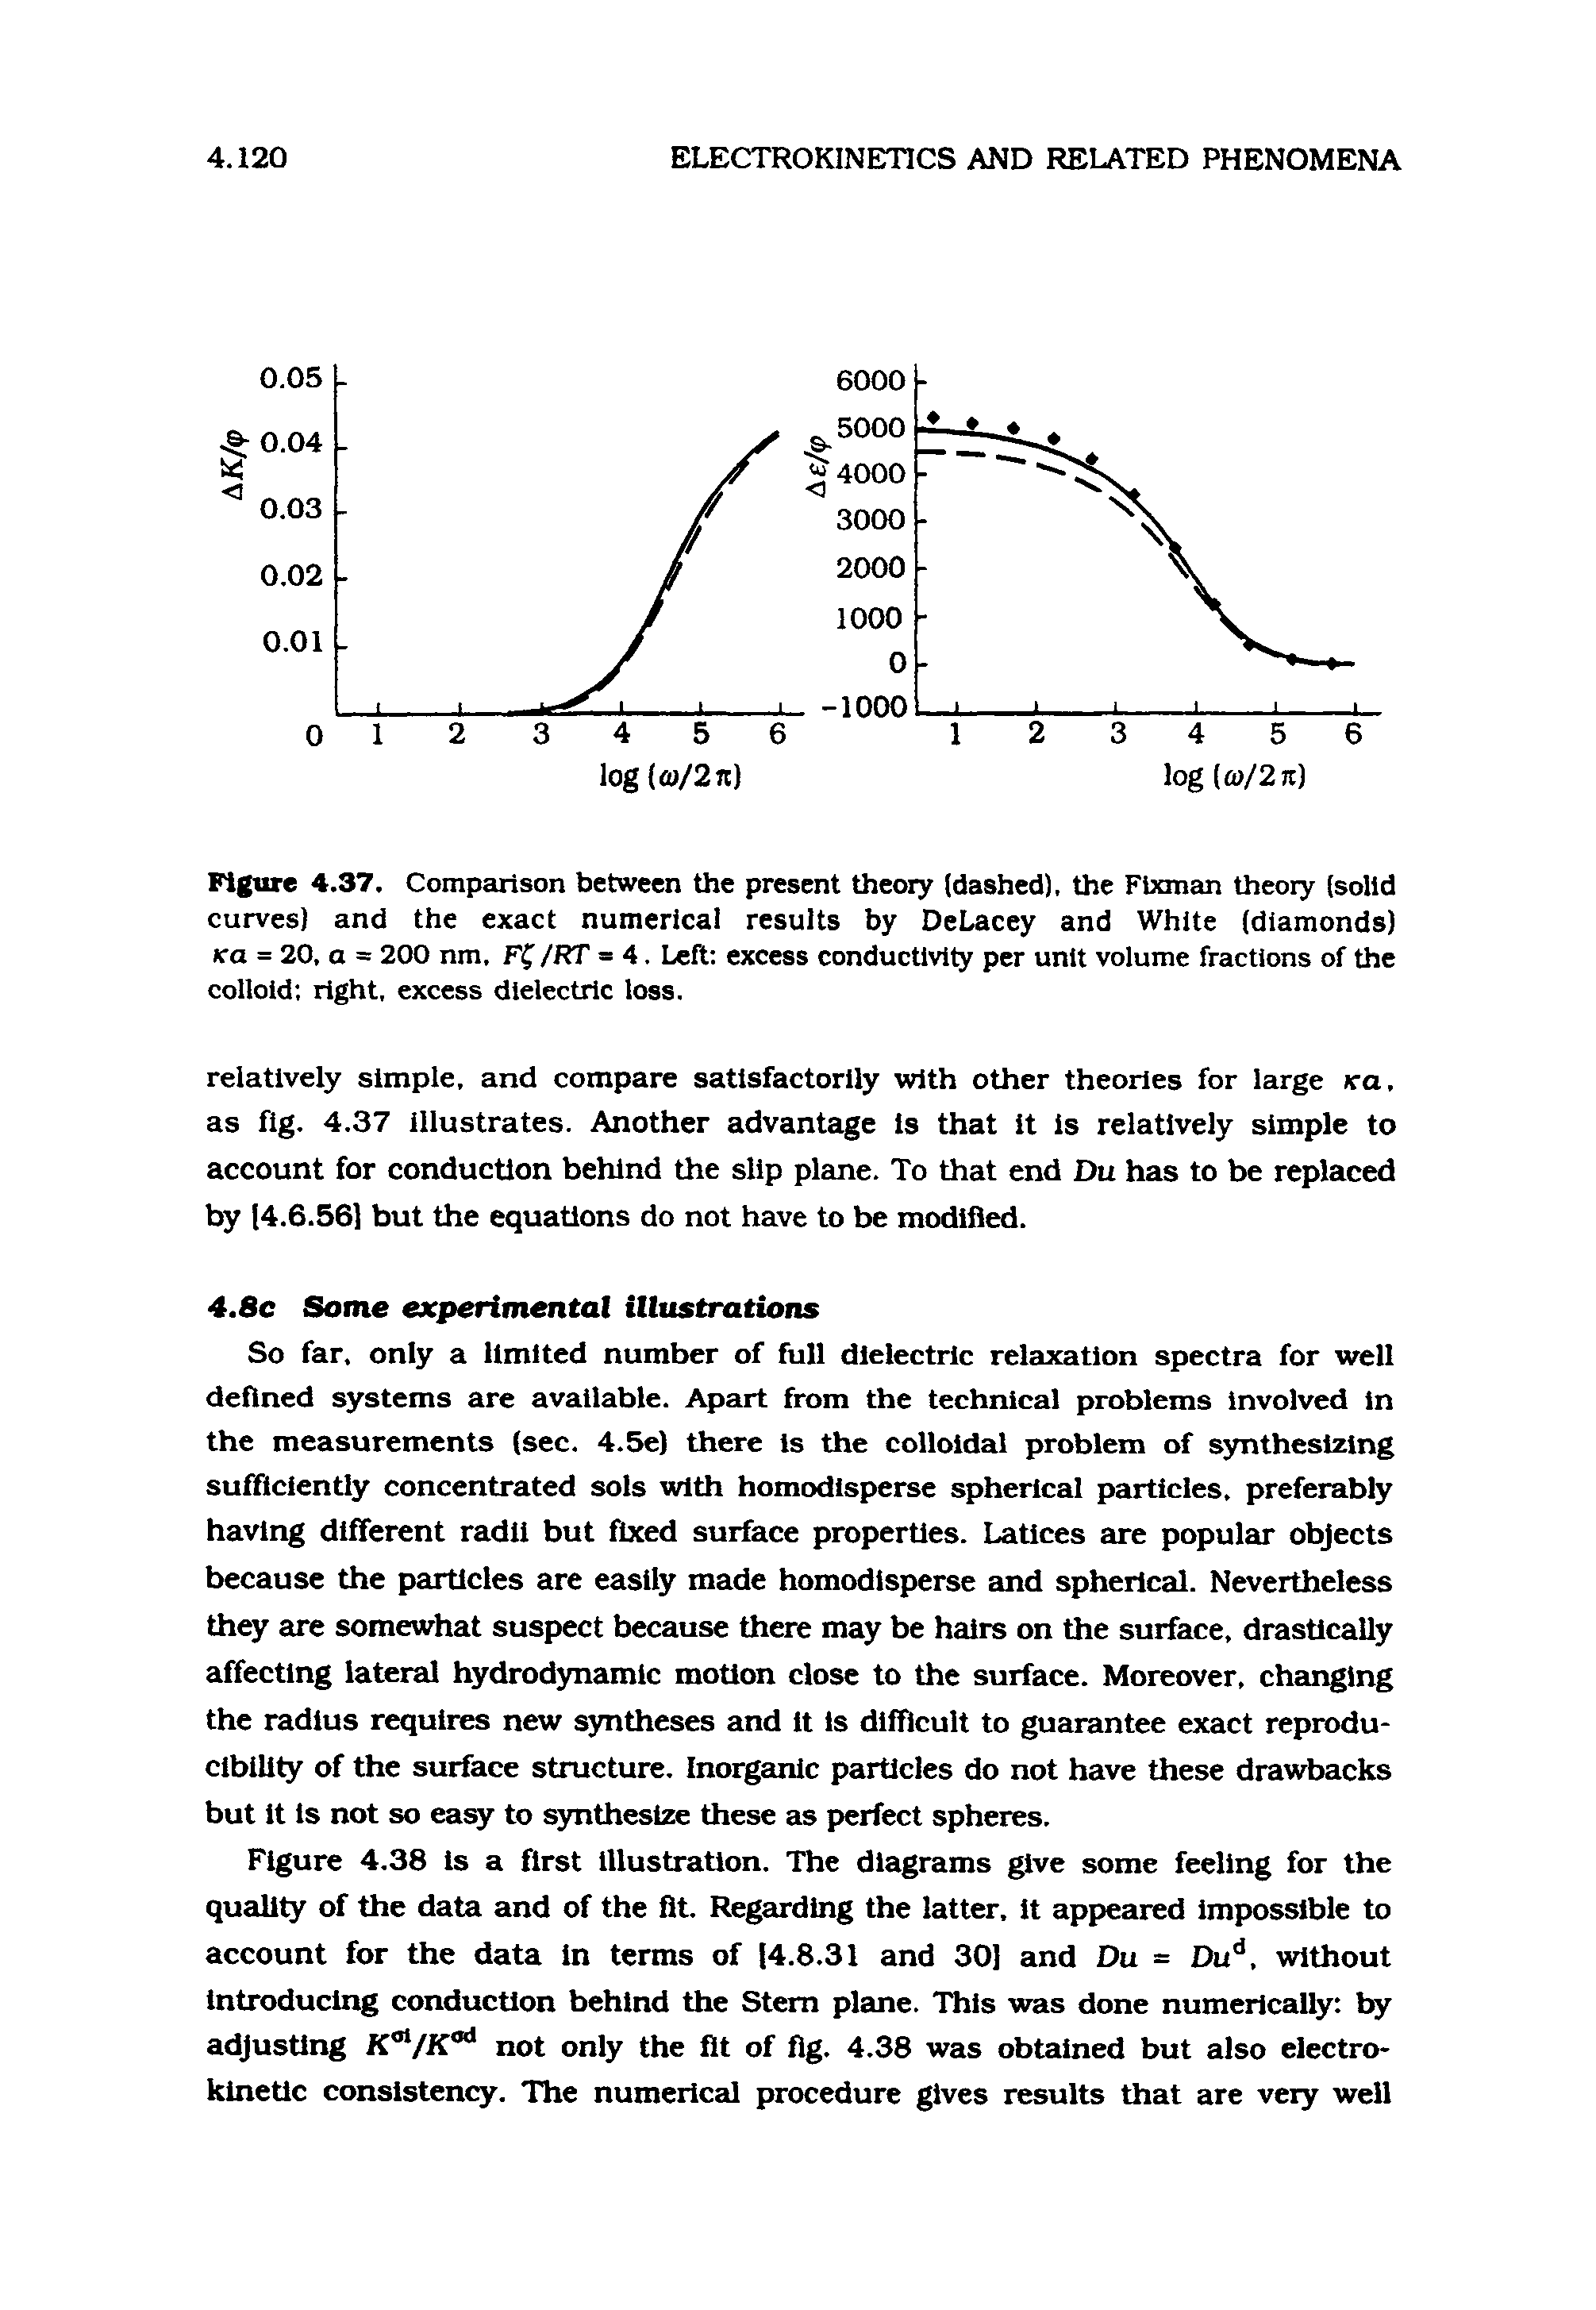 Figure 4.37. Comparison between the present theory (dashed), the Fixman theory (solid curves) and the exact numerical results by DeLacey and White (diamonds) Ka = 20, a = 200 nm, Ff /RT = 4. Left excess conductivity per unit volume fractions of the colloid right, excess dielectric loss.